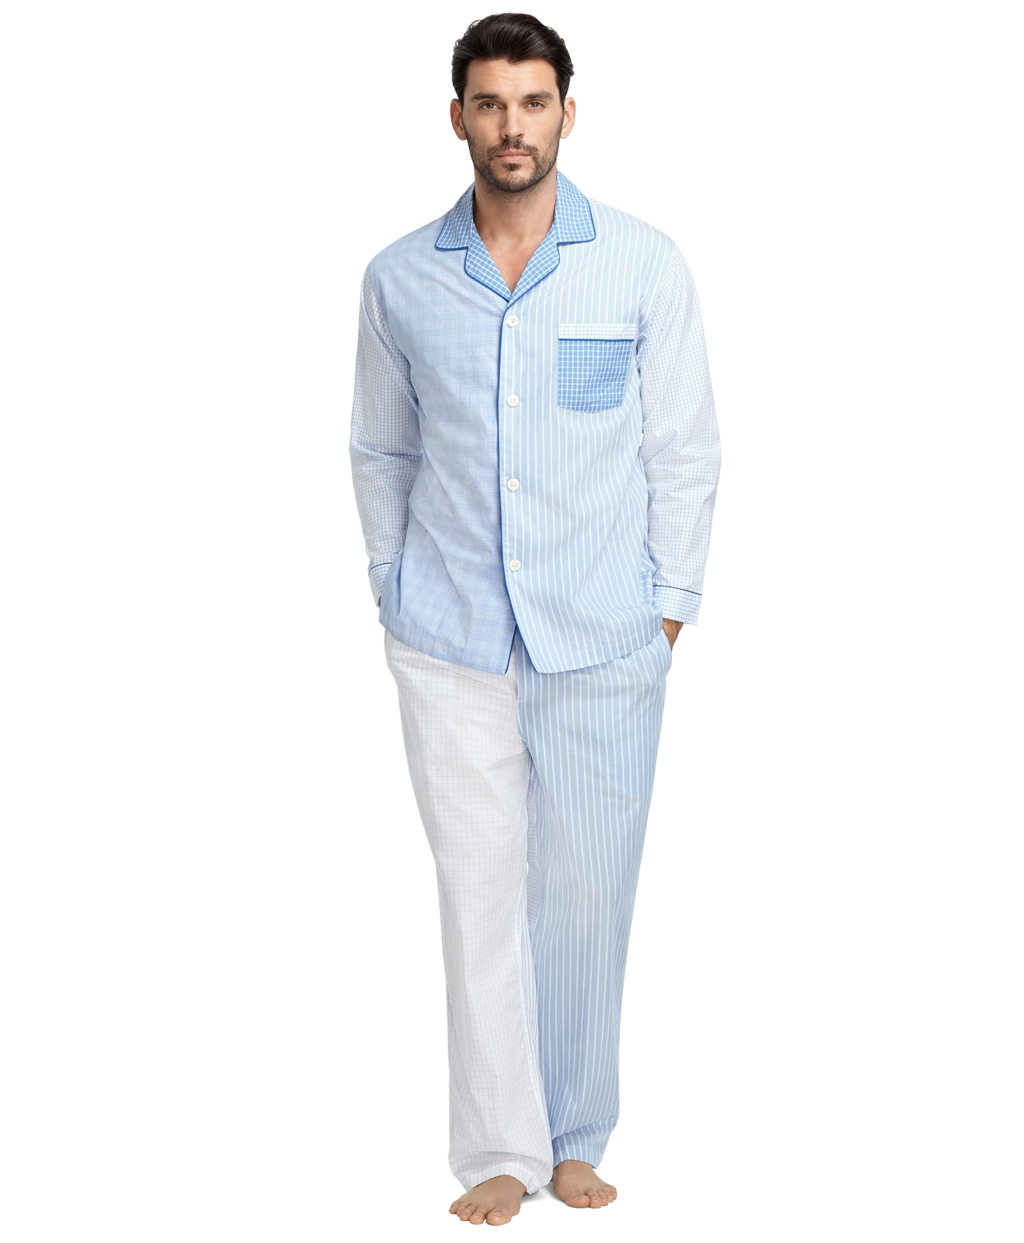 Brooks Brothers Fun Print Broadcloth Pajamas in Blue for Men - Lyst